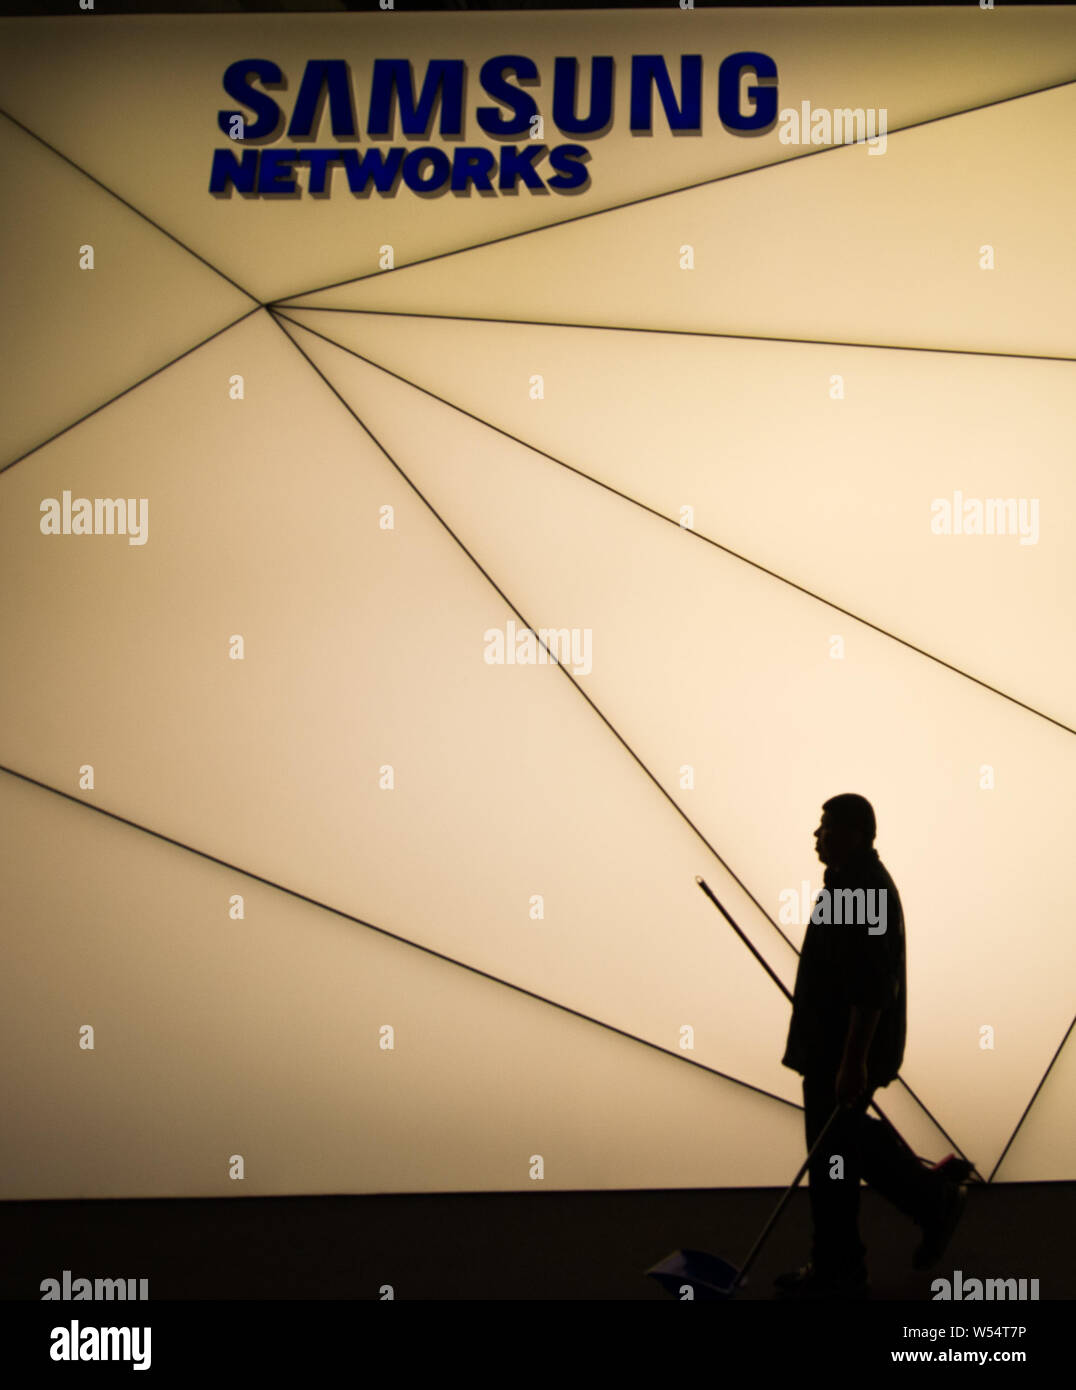 A cleaning worker walks past the stand of Samsung Networks during the Mobile World Congress 2019 (MWC19) in Barcelona, Spain, 25 February 2019. Stock Photo